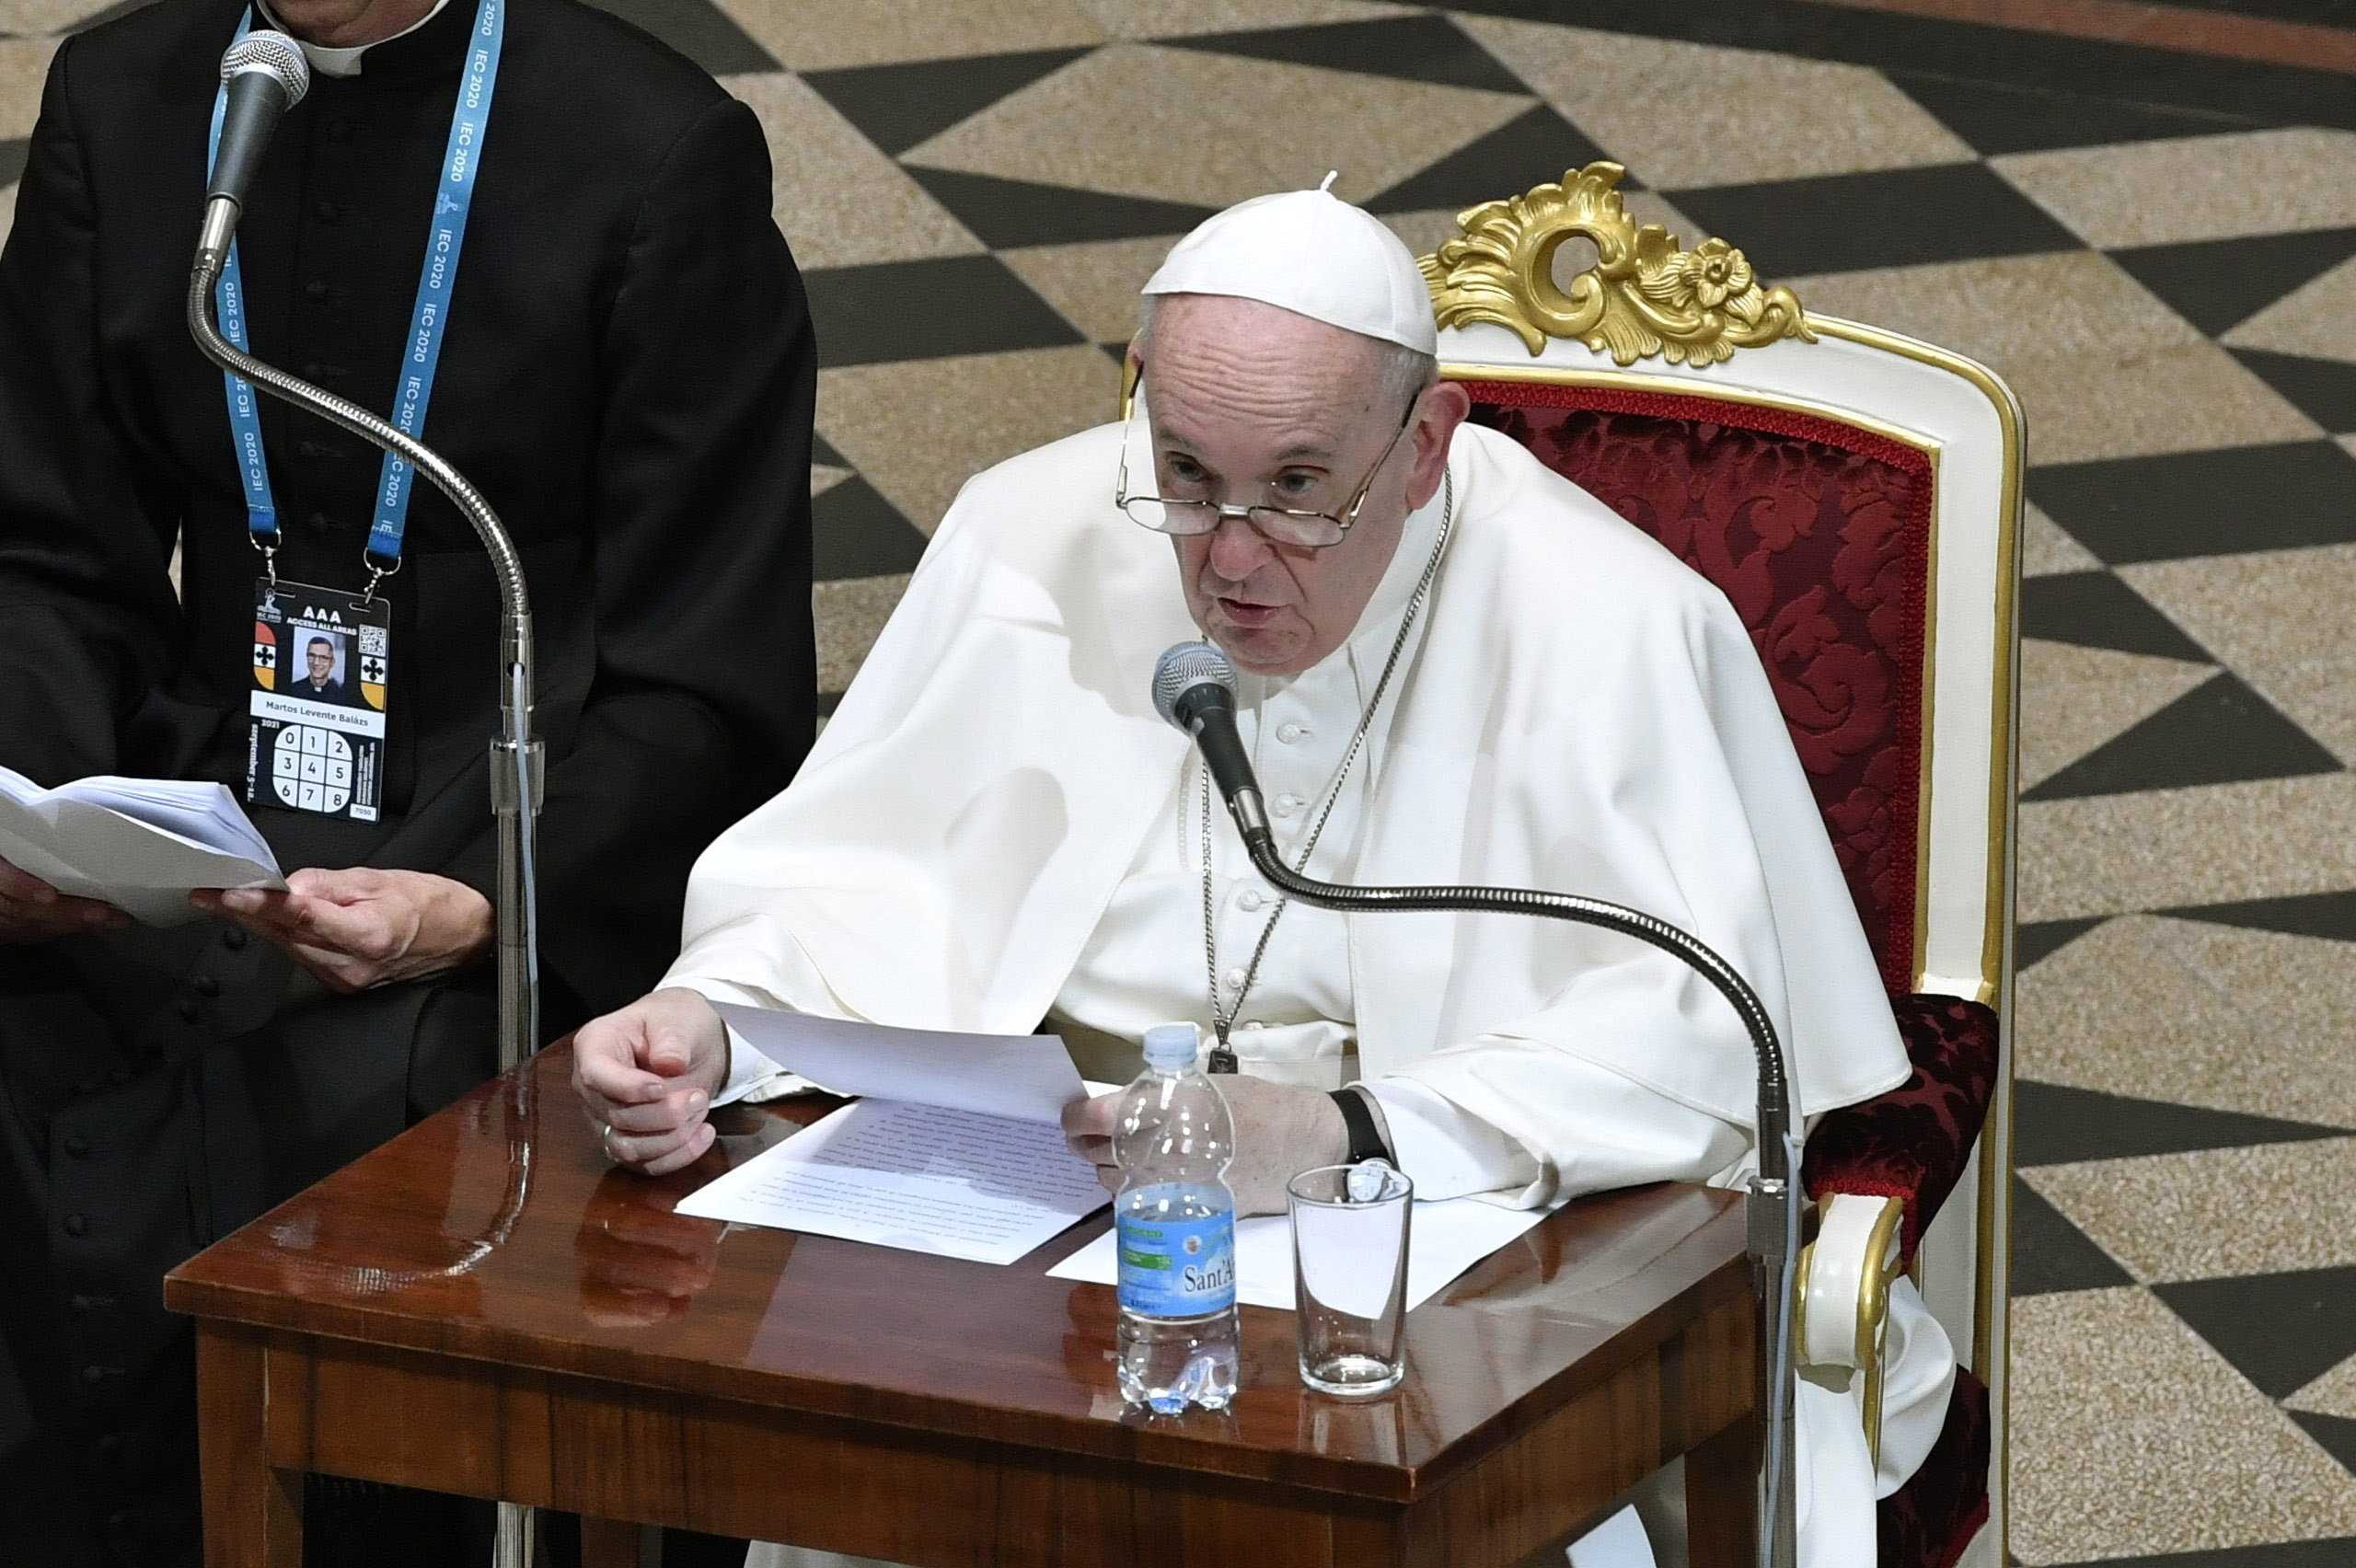 Pope Francis called for the unity of Jews and Christians, also quoted Radnóti 